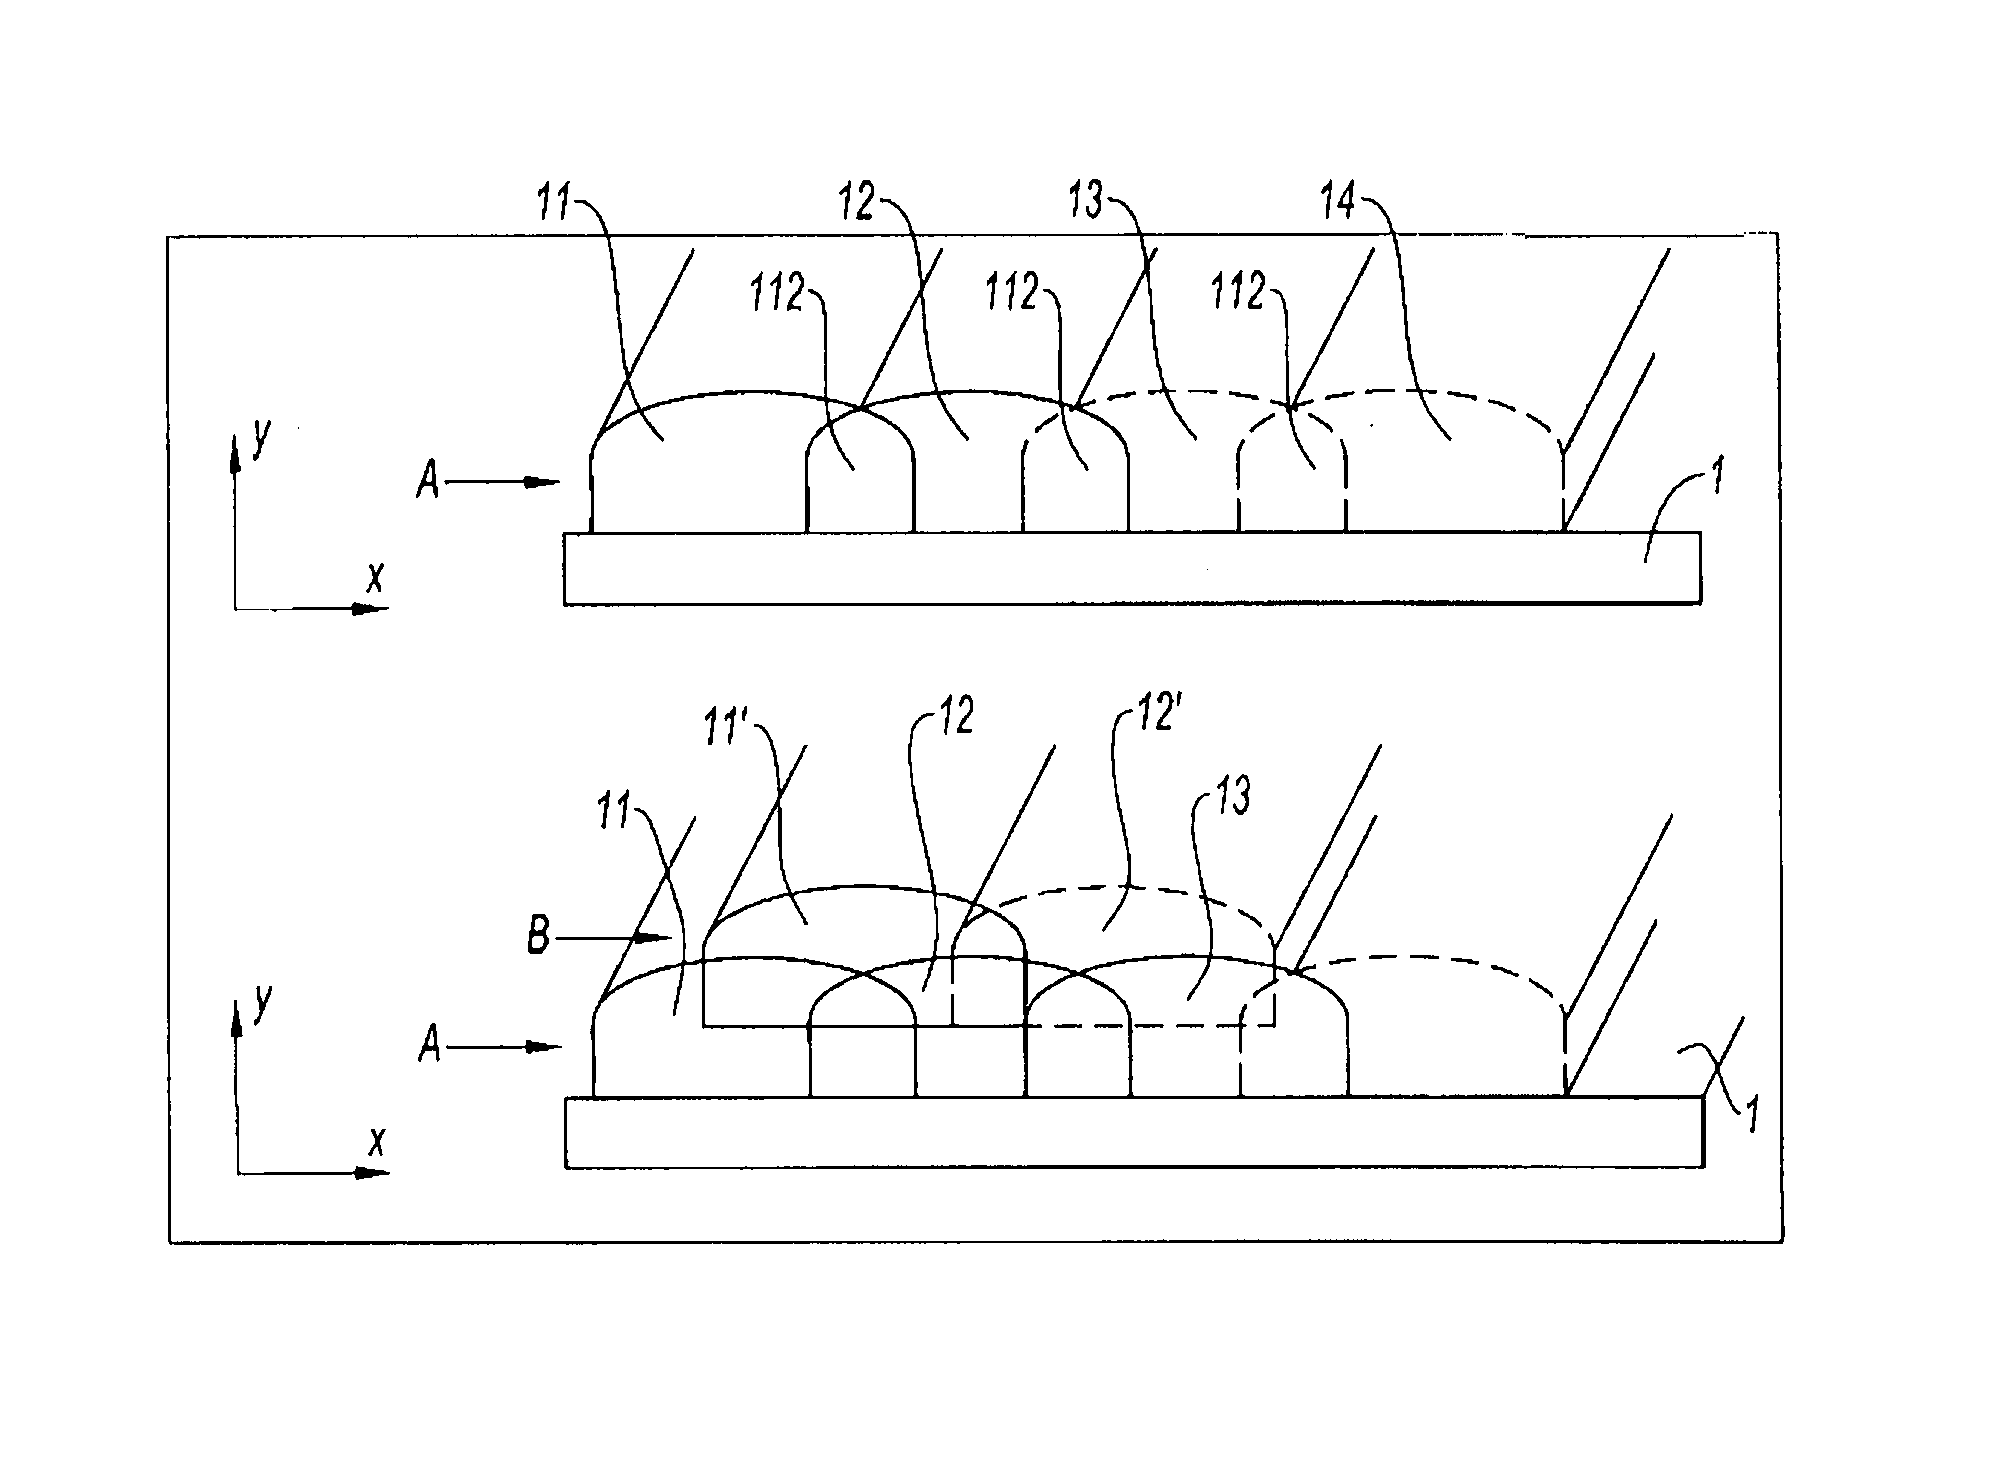 Manufacture of a portion of a metal part using the MIG method with pulsed current and wire